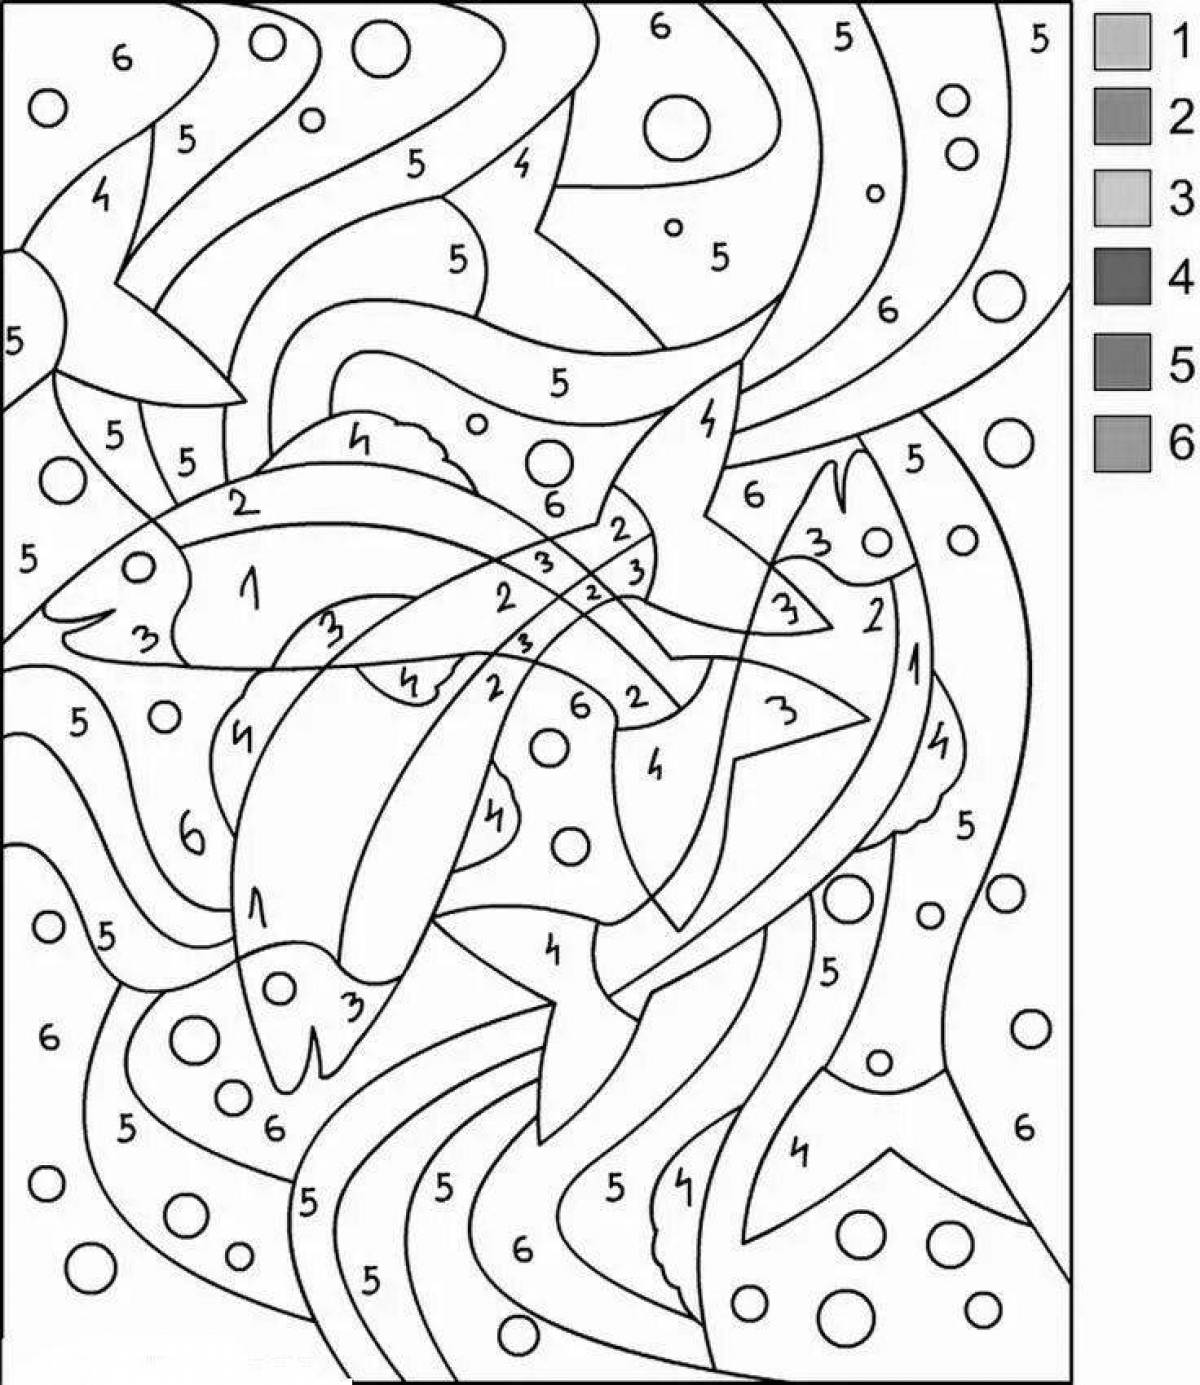 Paint by numbers colorful glitter coloring book